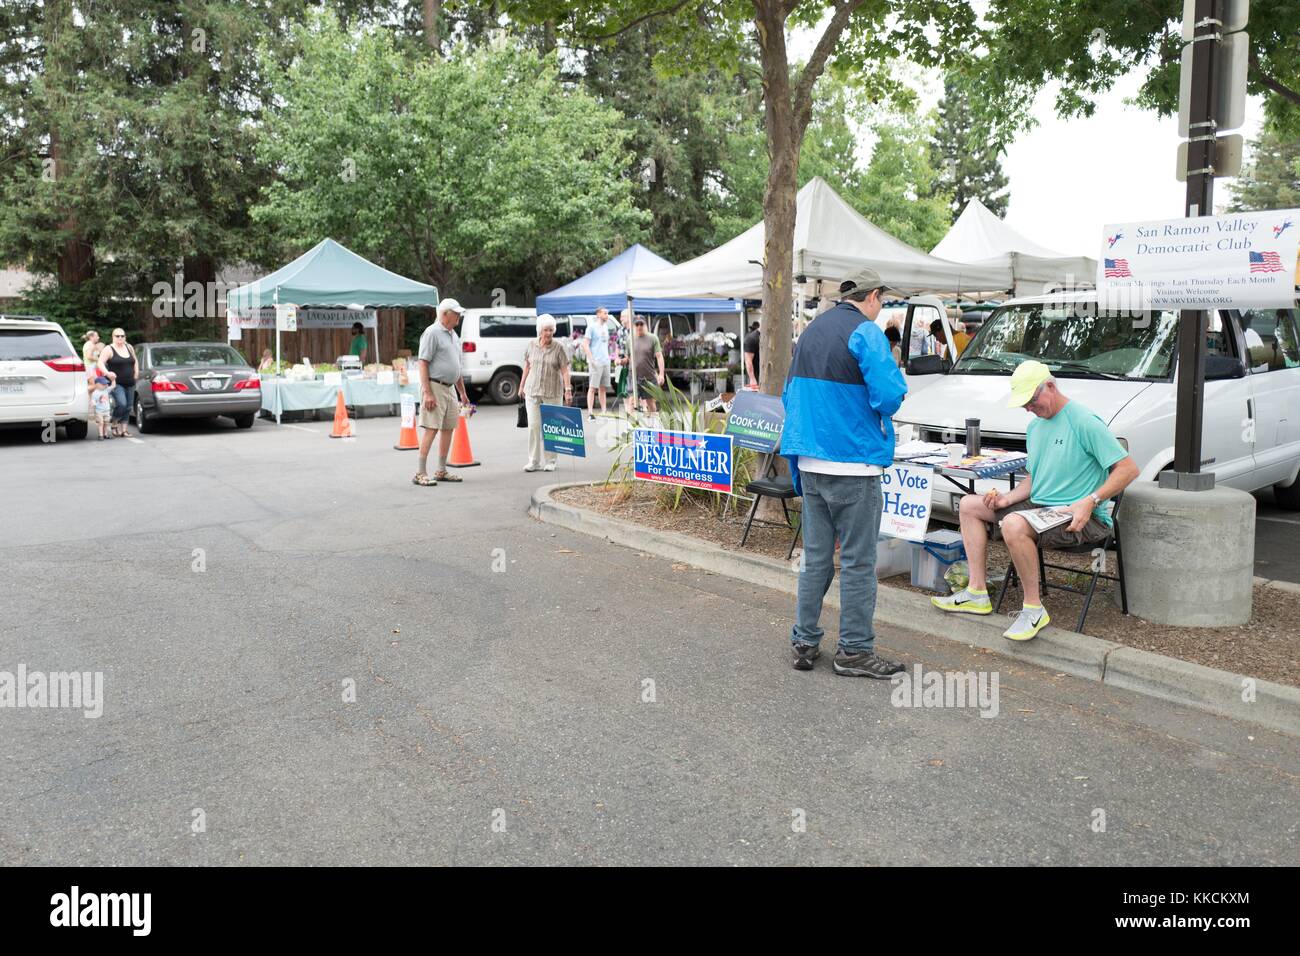 At a weekly farmers' market in the San Francisco Bay Area, a volunteer hands out information on local Democratic political candidates to passersby, Danville, California, June 5, 2016. Stock Photo